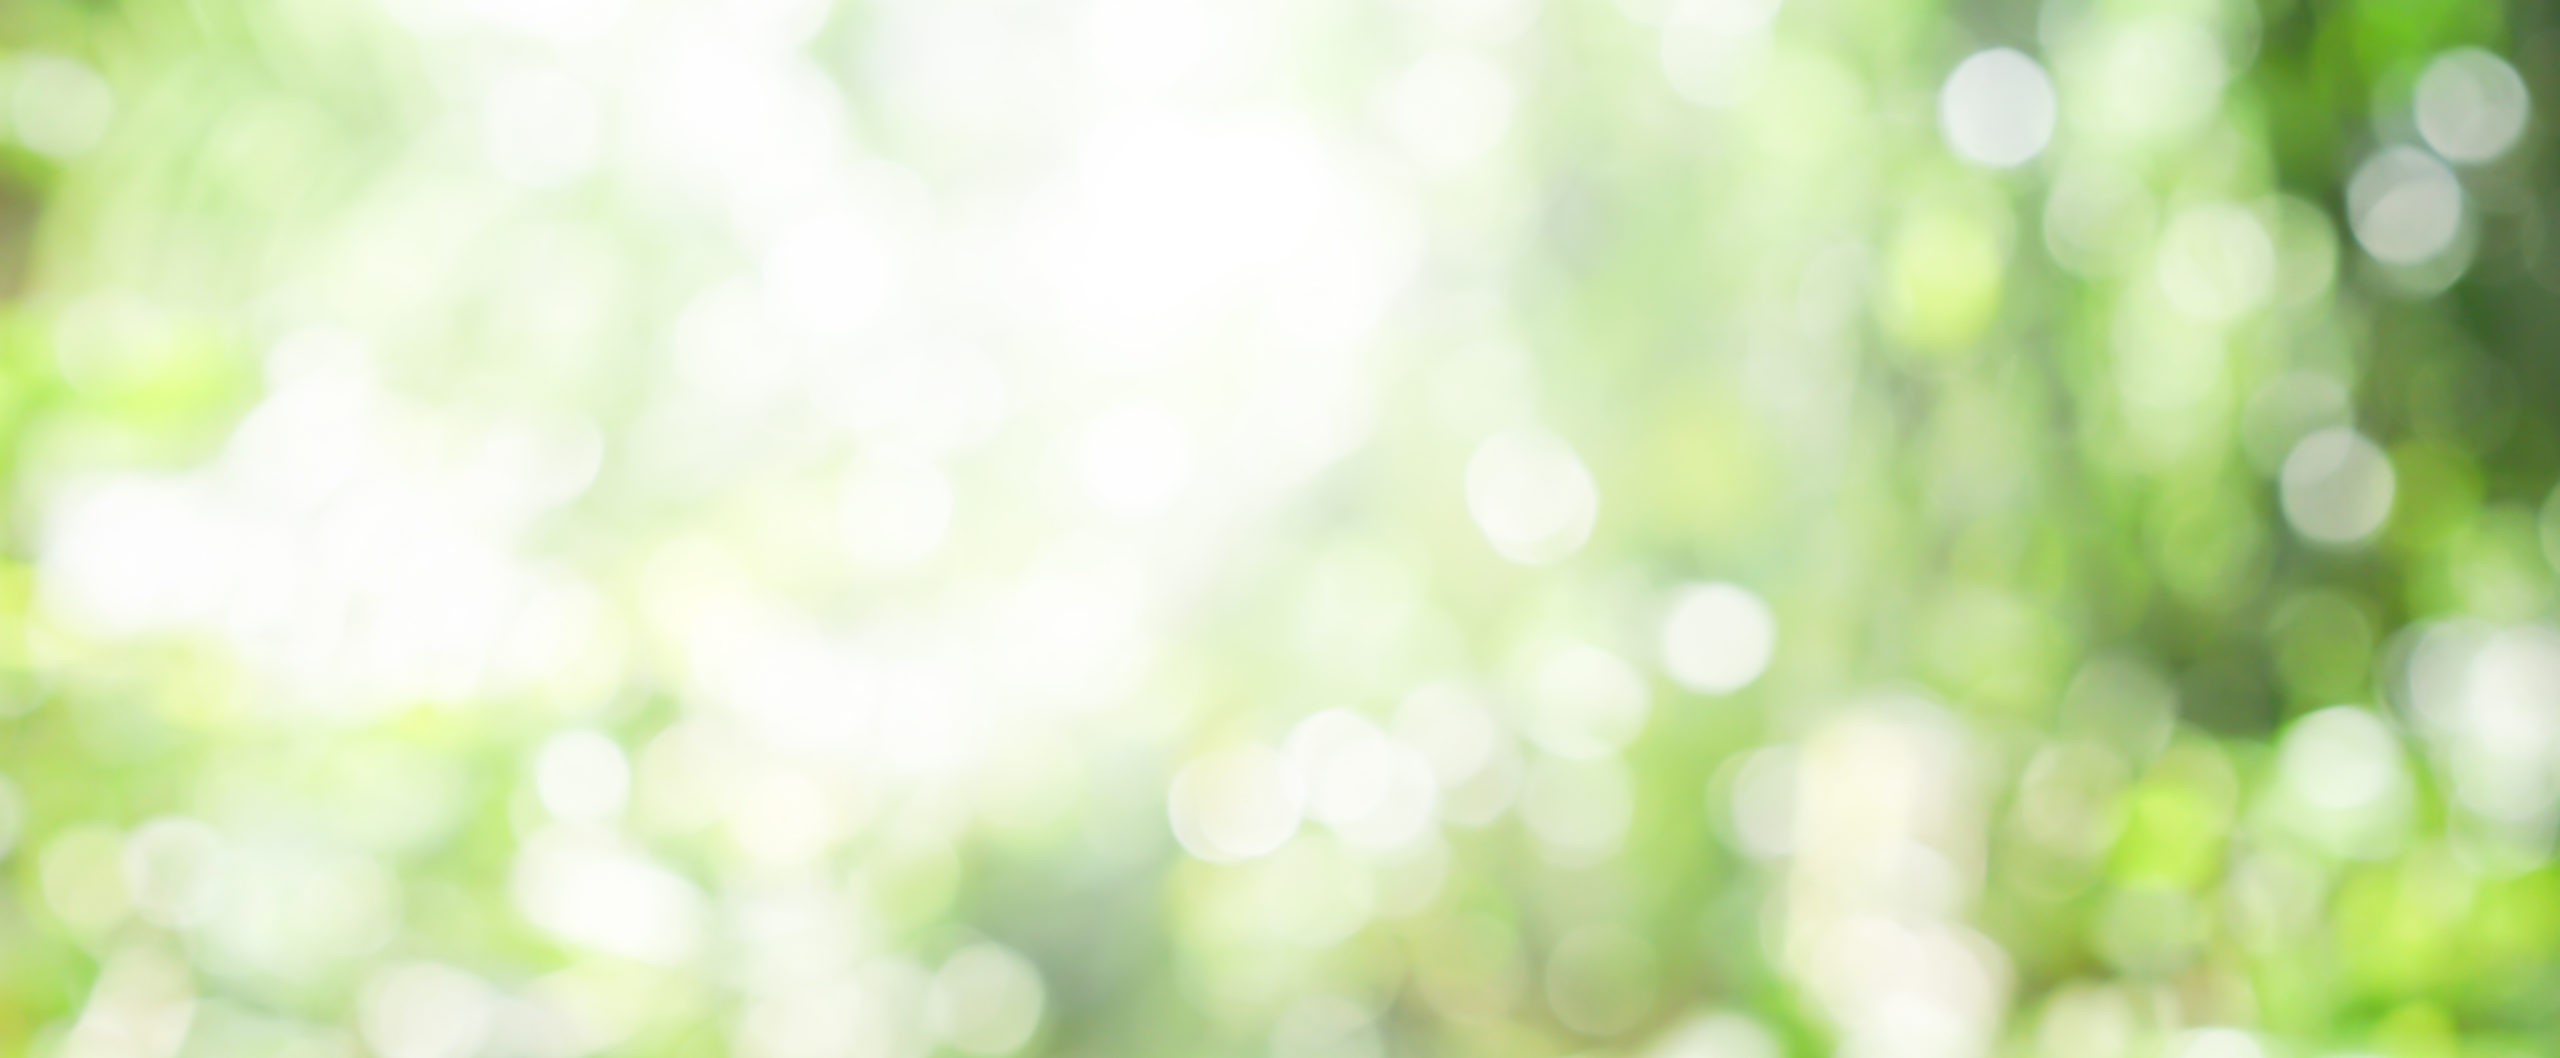 blurry green nature forest landscape background with sunlight flare:blurred bokeh natural backdrop